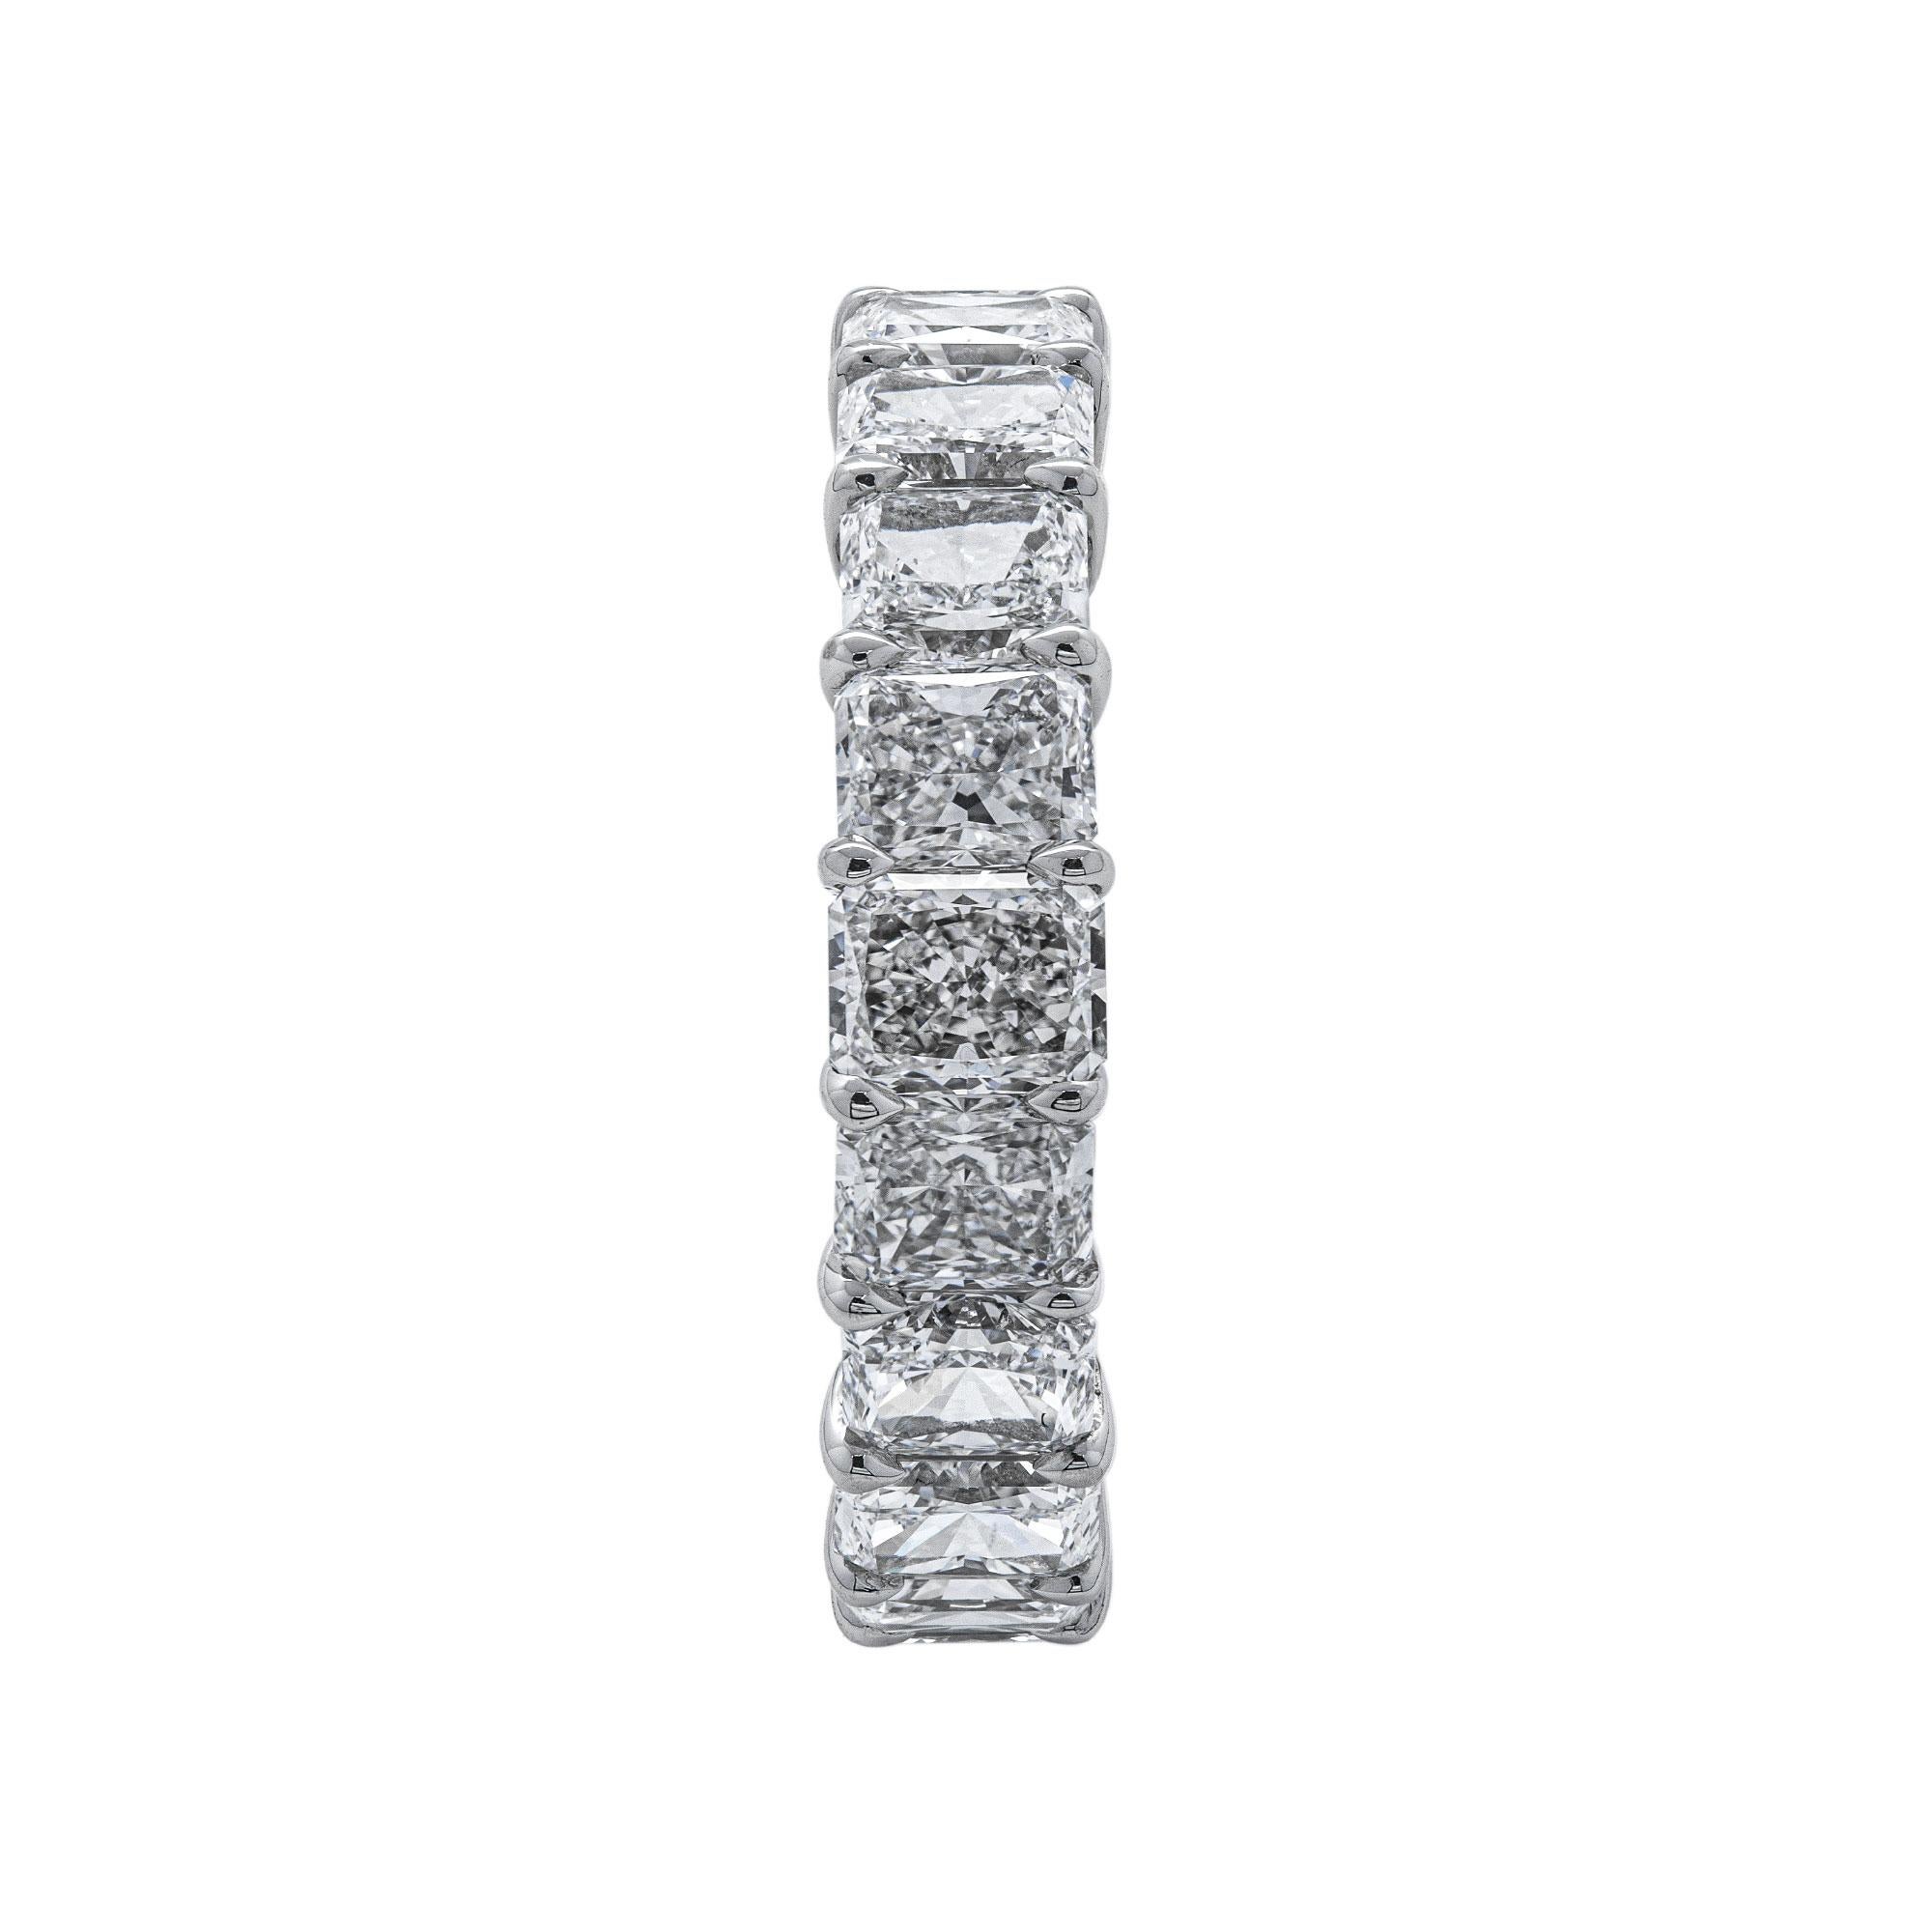 Eternity band with 5.81ct Radiant Cut Diamonds
Mounted in Platinum 950, 19 Radiant cut diamonds won't miss a sparkle!
Beautiful cut, bold and classy
Each stone is 0.3ct 
All diamonds are GIA Certified:
1.	0.30ct F VVS2 GIA#1333980136
2.	0.30CT G